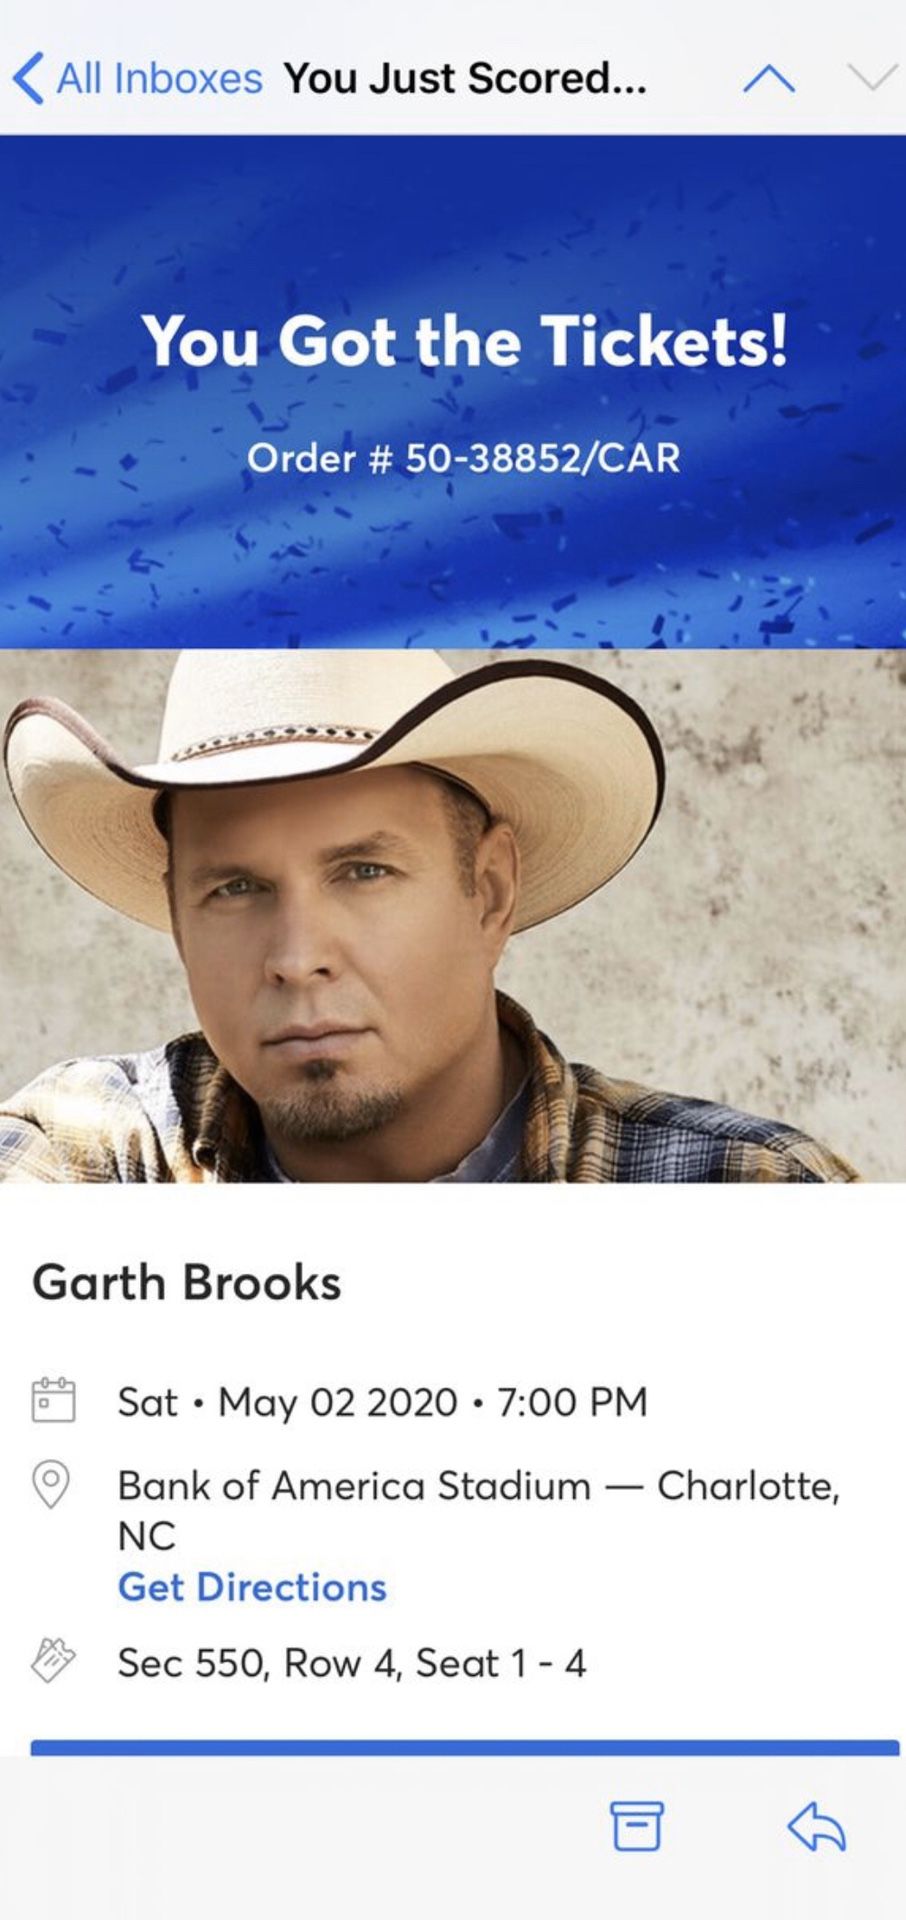 2 aisle seats to see Garth Brooks! 200 for both